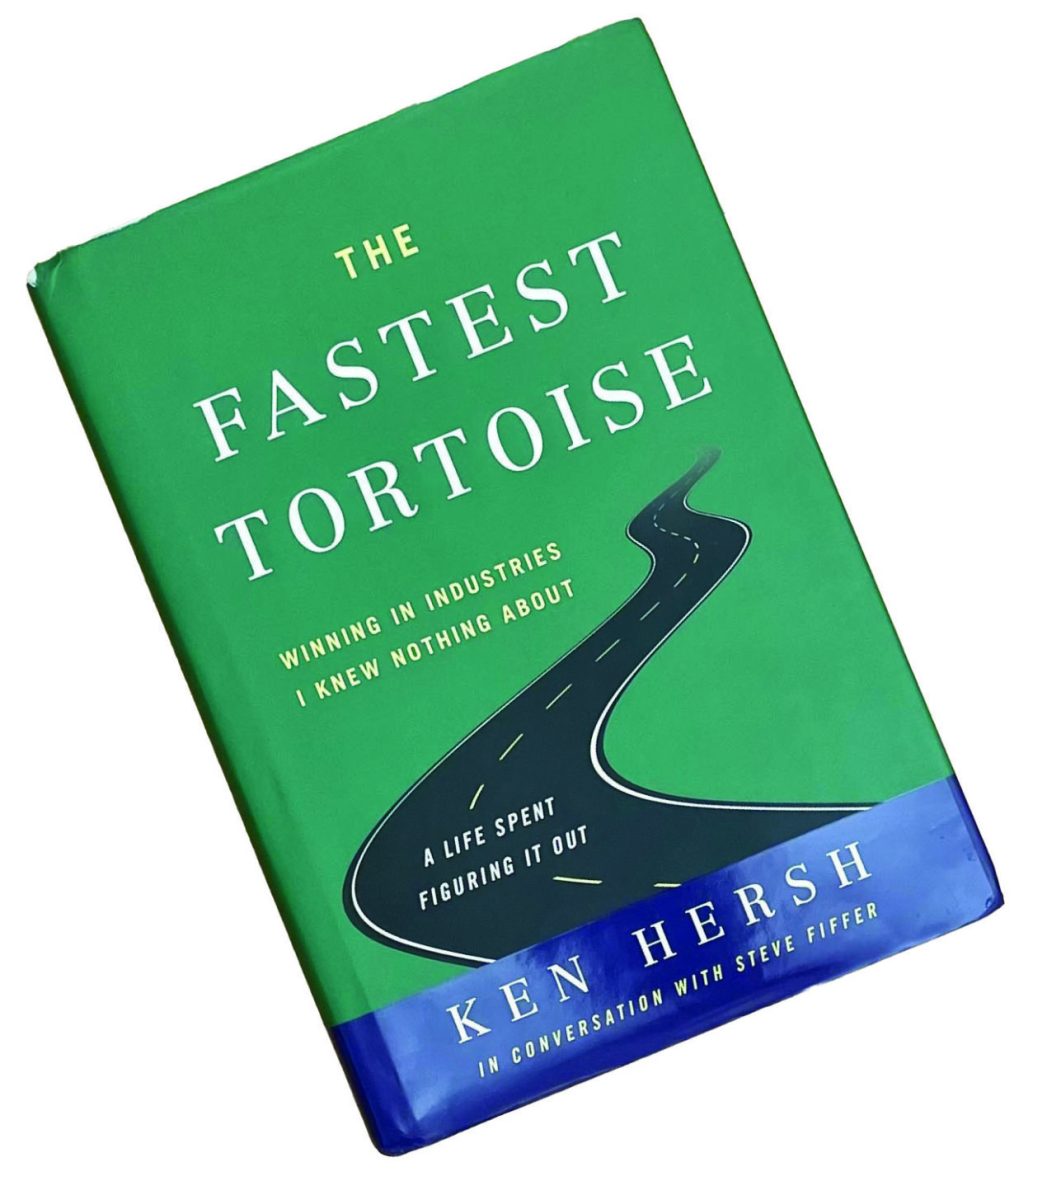 Find+Ken+Hersh%E2%80%99s+newest+book%2C+The+Fastest+Tortoise%3A+Winning+in+Industries+I+Knew+Nothing+About+%E2%80%94+A+Life+Spent+Figuring+It+Out%2C+online+and+at+book+stores+near+you.+The+memoir%2C+published+in+a+Q%26A+format+co-authored+by+Steve+Fiffer%2C+was+released+on+March+23.+This+is+Hersh%E2%80%99s+first+book.+